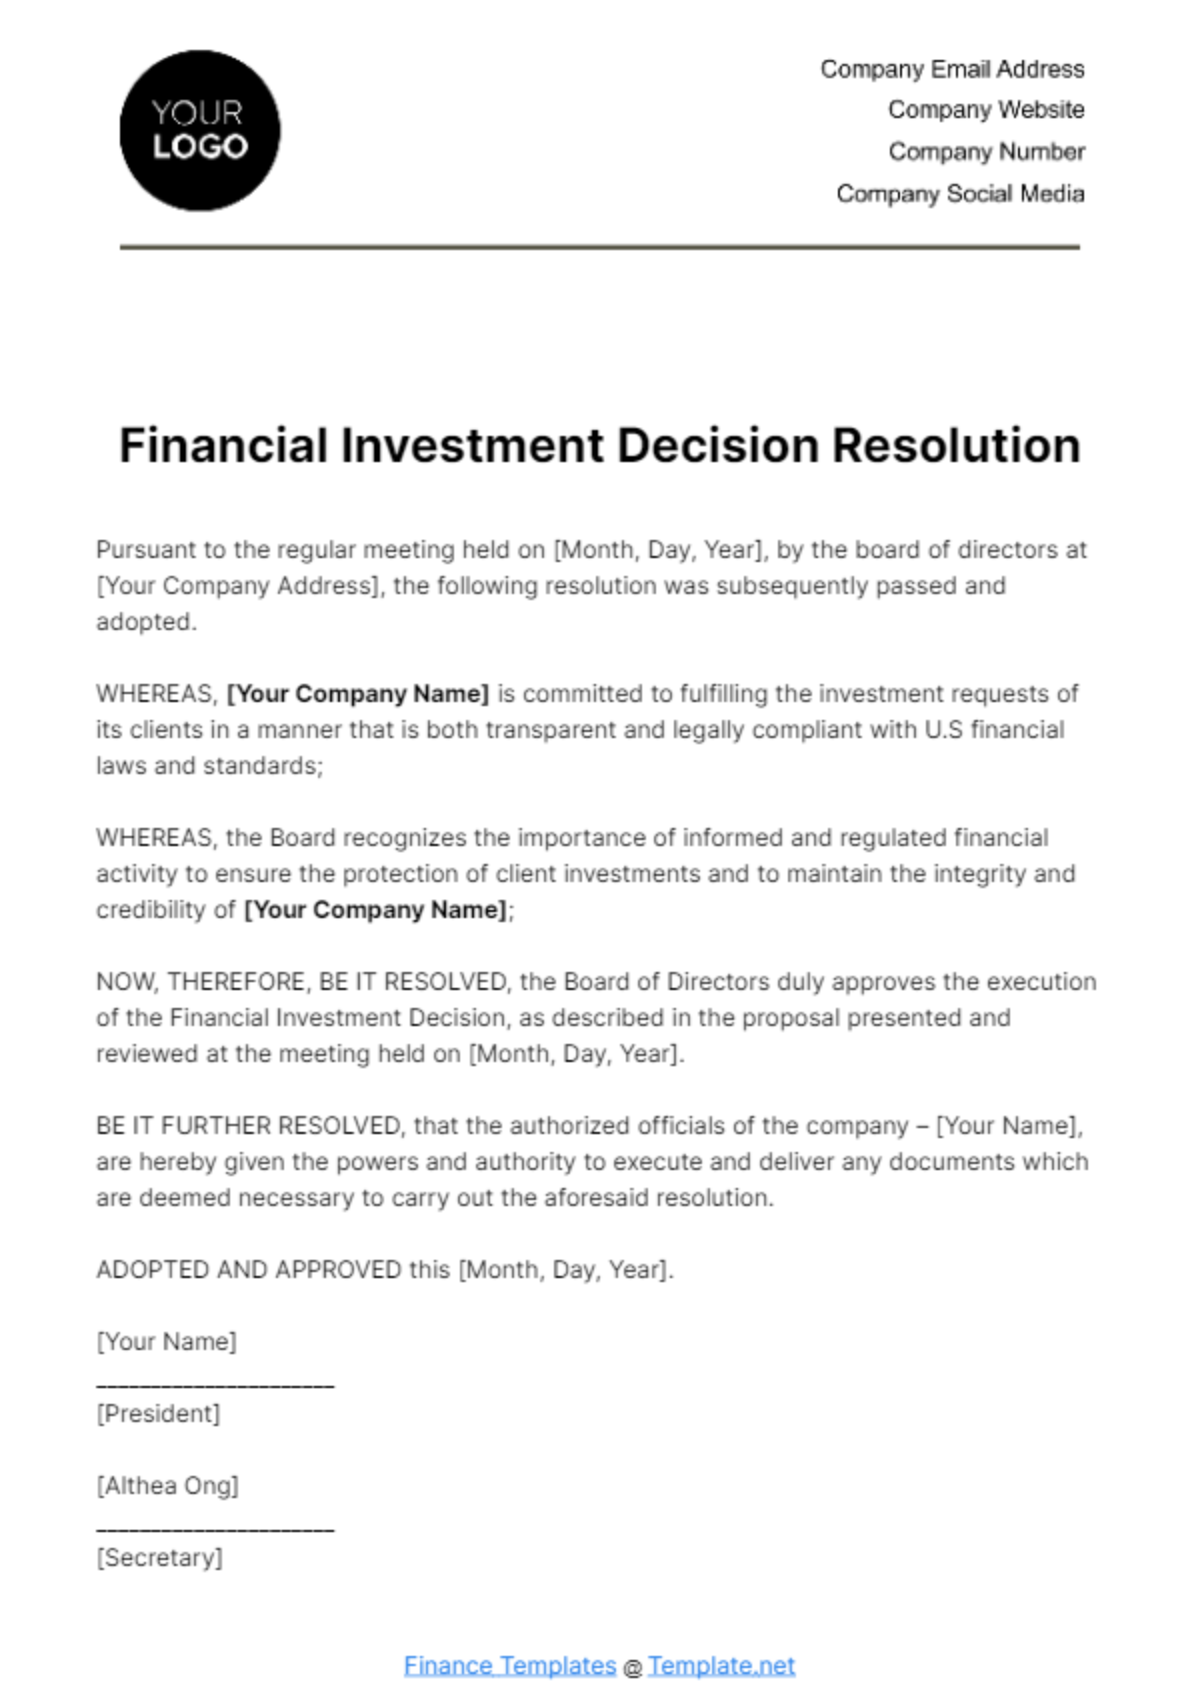 Free Financial Investment Decision Resolution Template